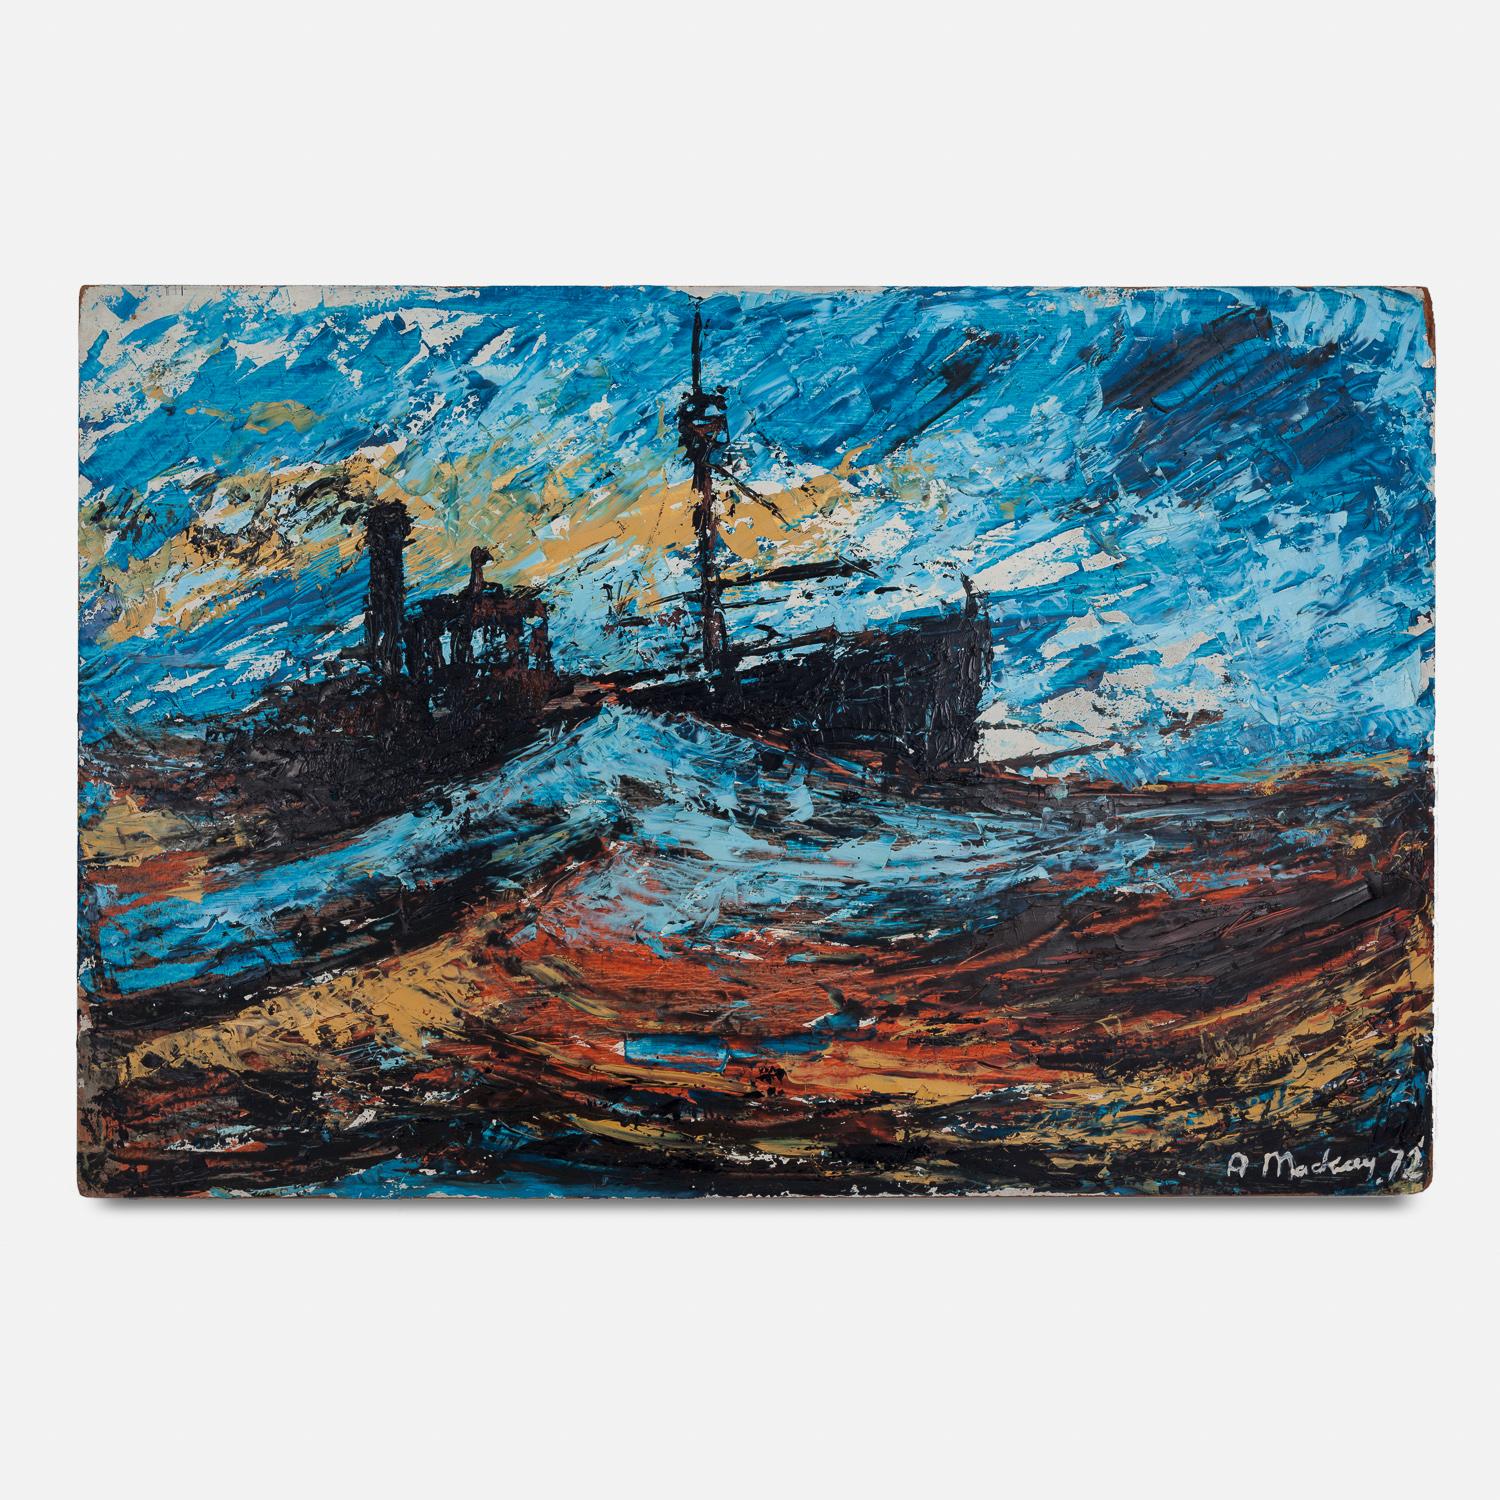 Unknown Landscape Painting - 20th Century Oil on Board Painting of a Fishing Trawler by A. Mackay